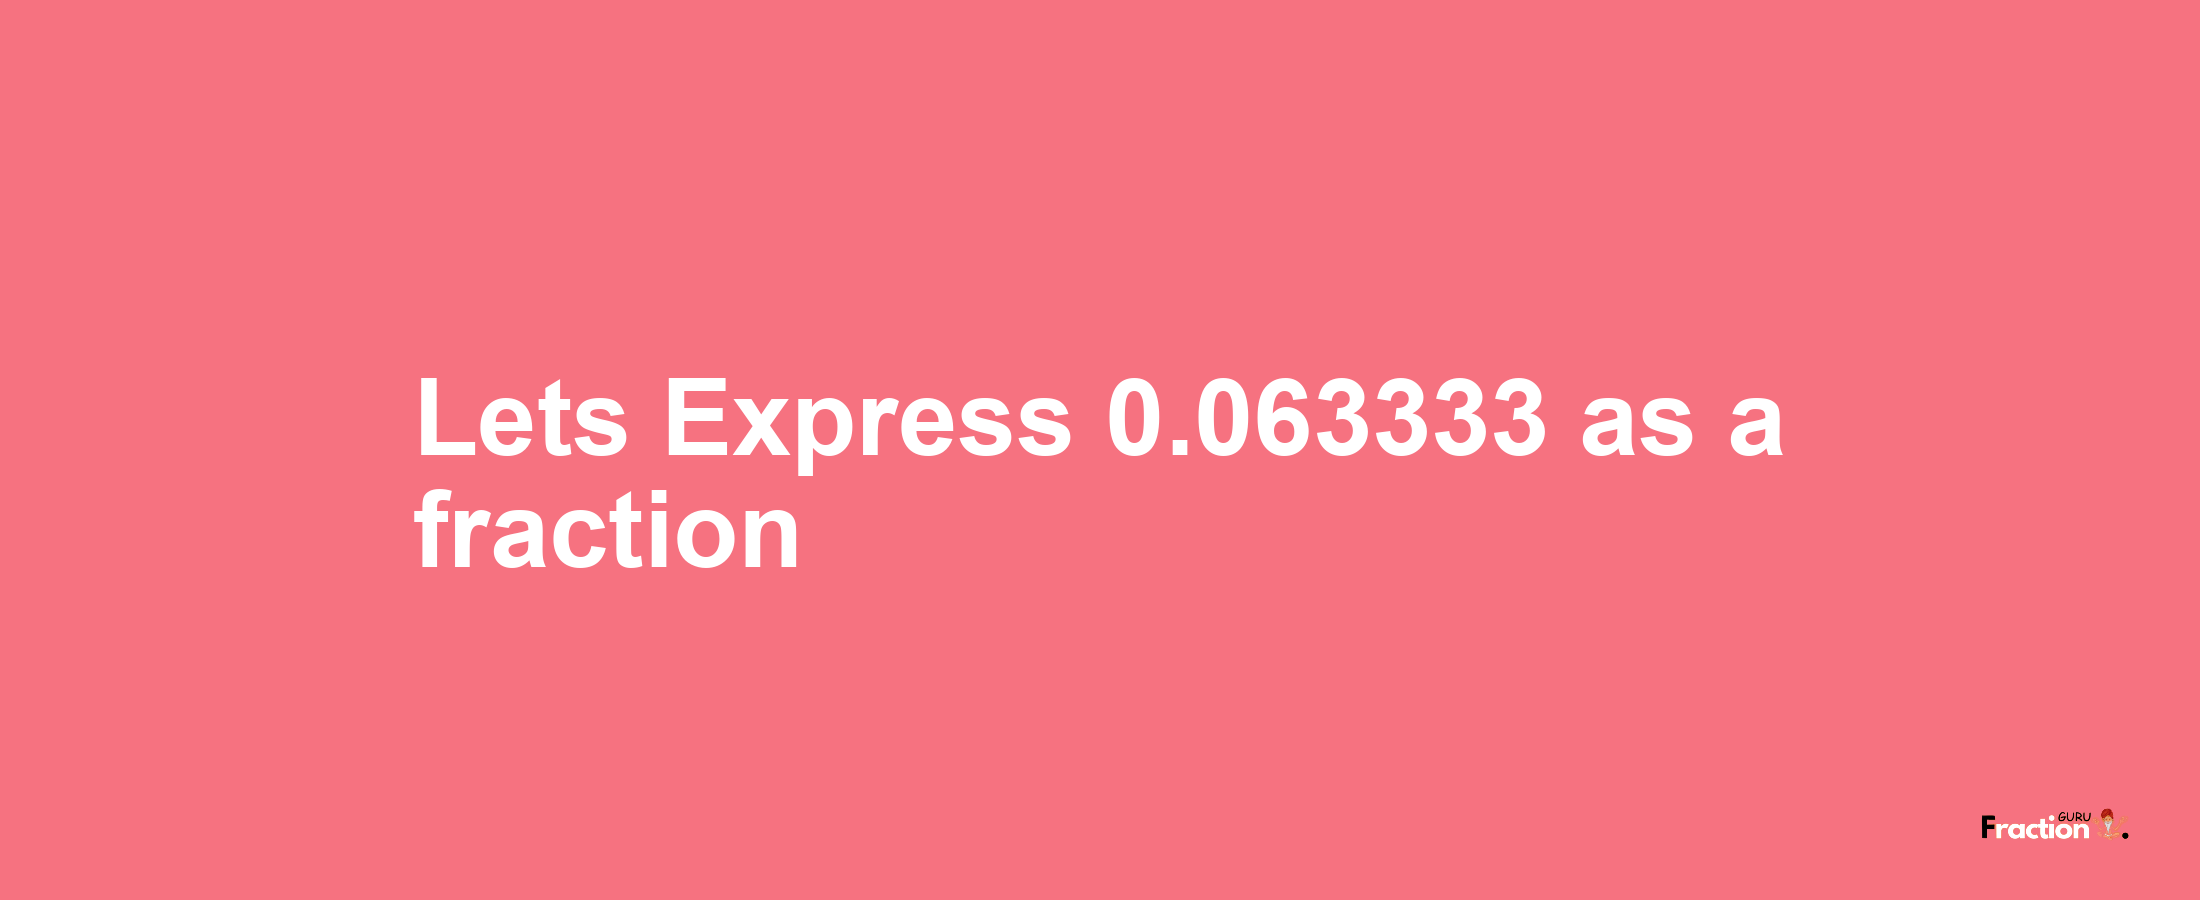 Lets Express 0.063333 as afraction